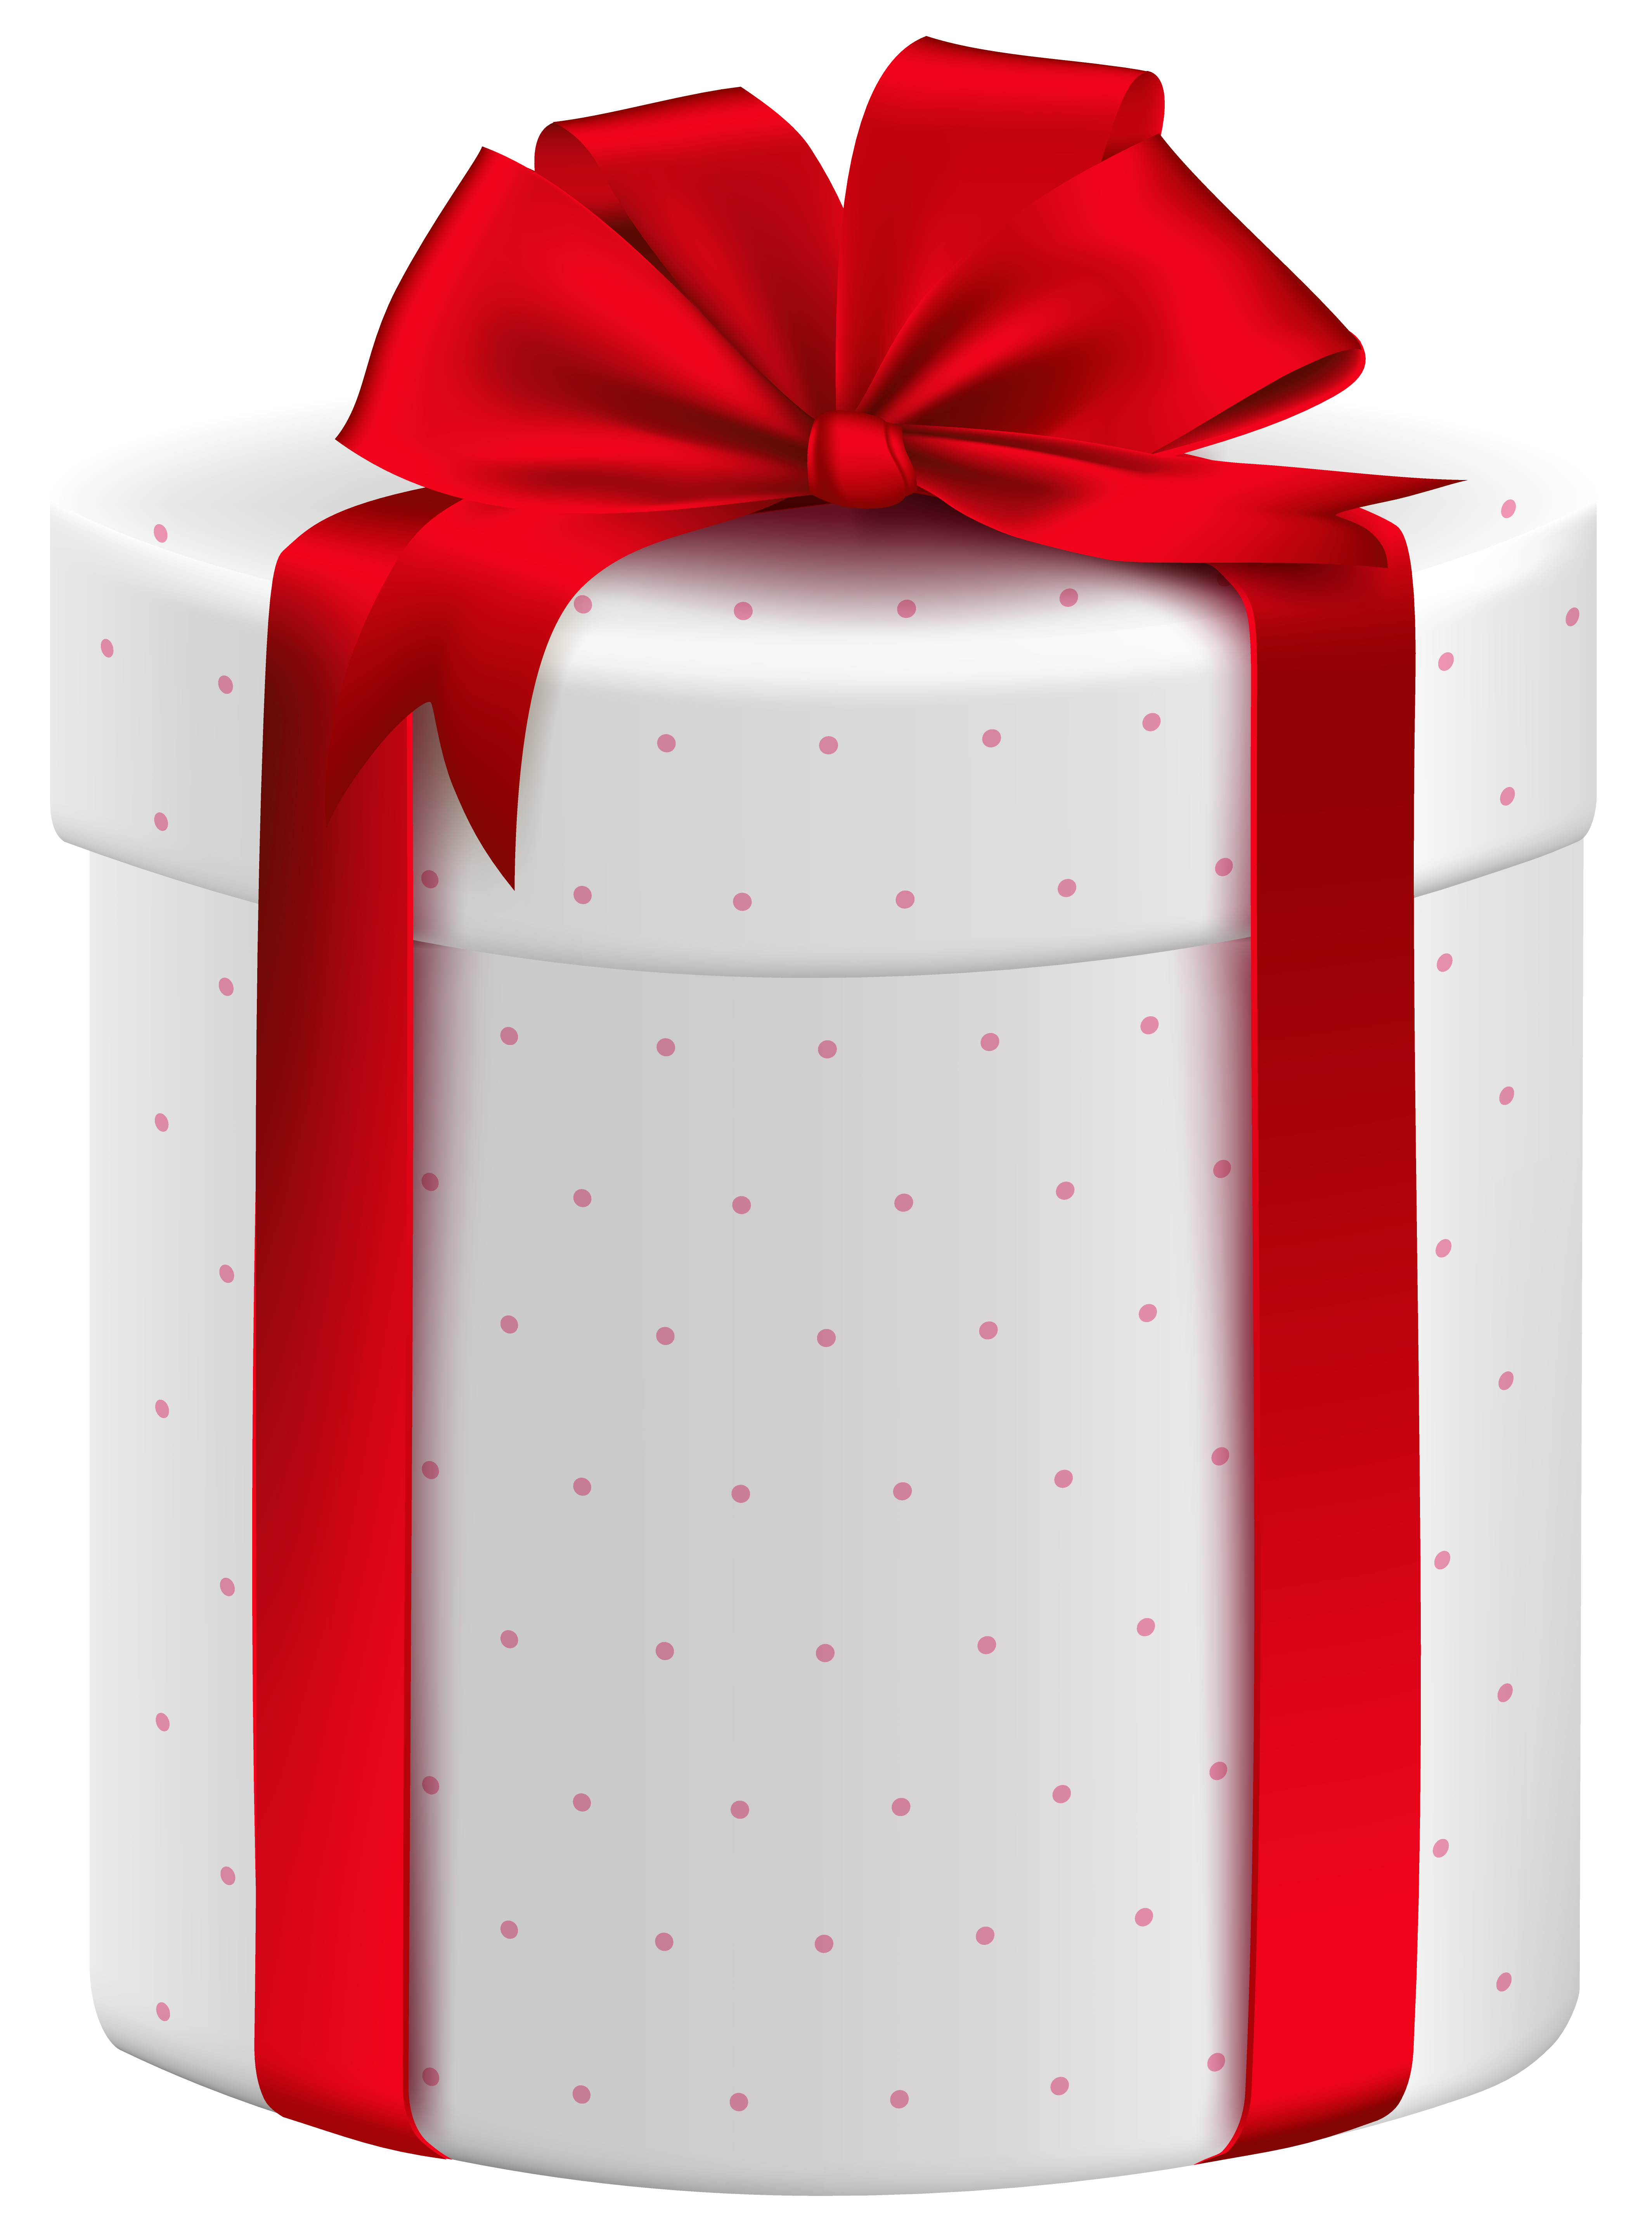 Christmas gift Clip art WHITE BOX png download 4258*5770 Free